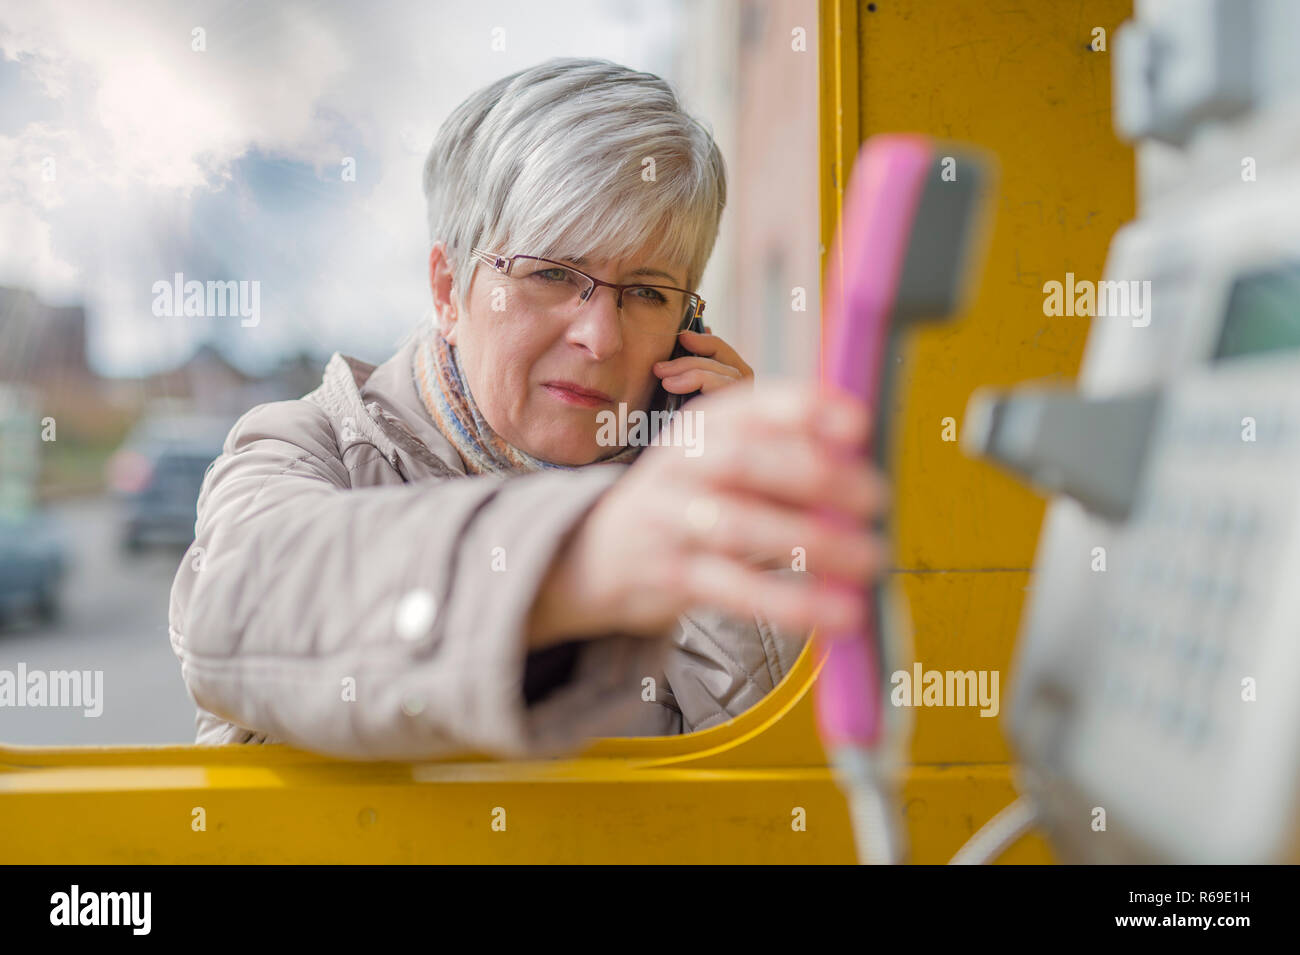 An Elderly Lady Stands On Smartphone In The Ear At A Phone Booth And Engages With His Hand Up The Phone. Stock Photo